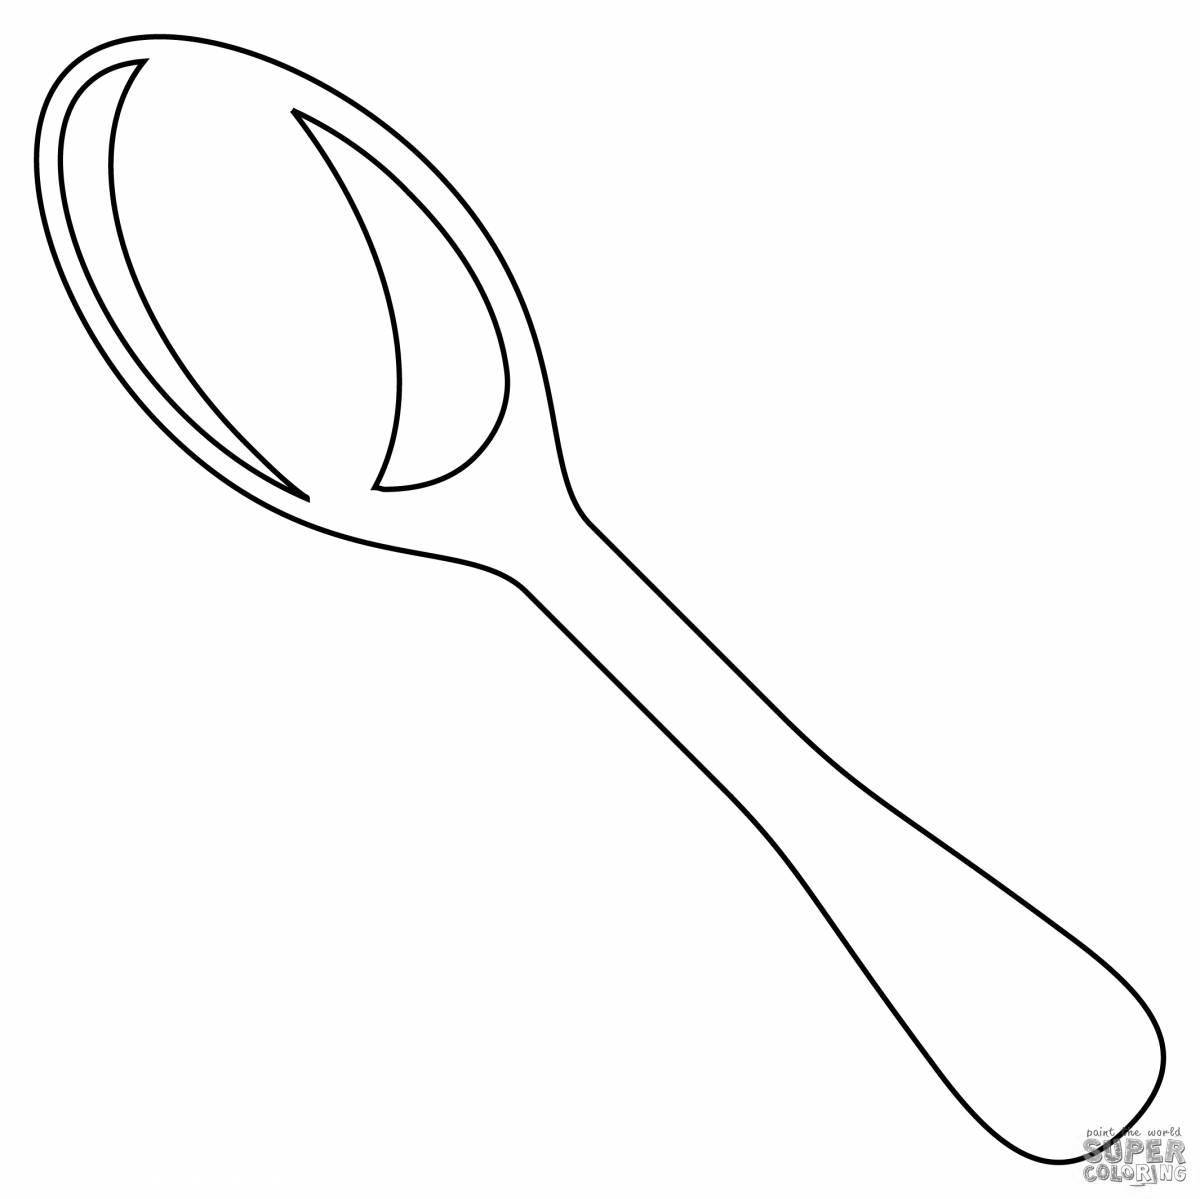 Colorful spoon coloring page for kids